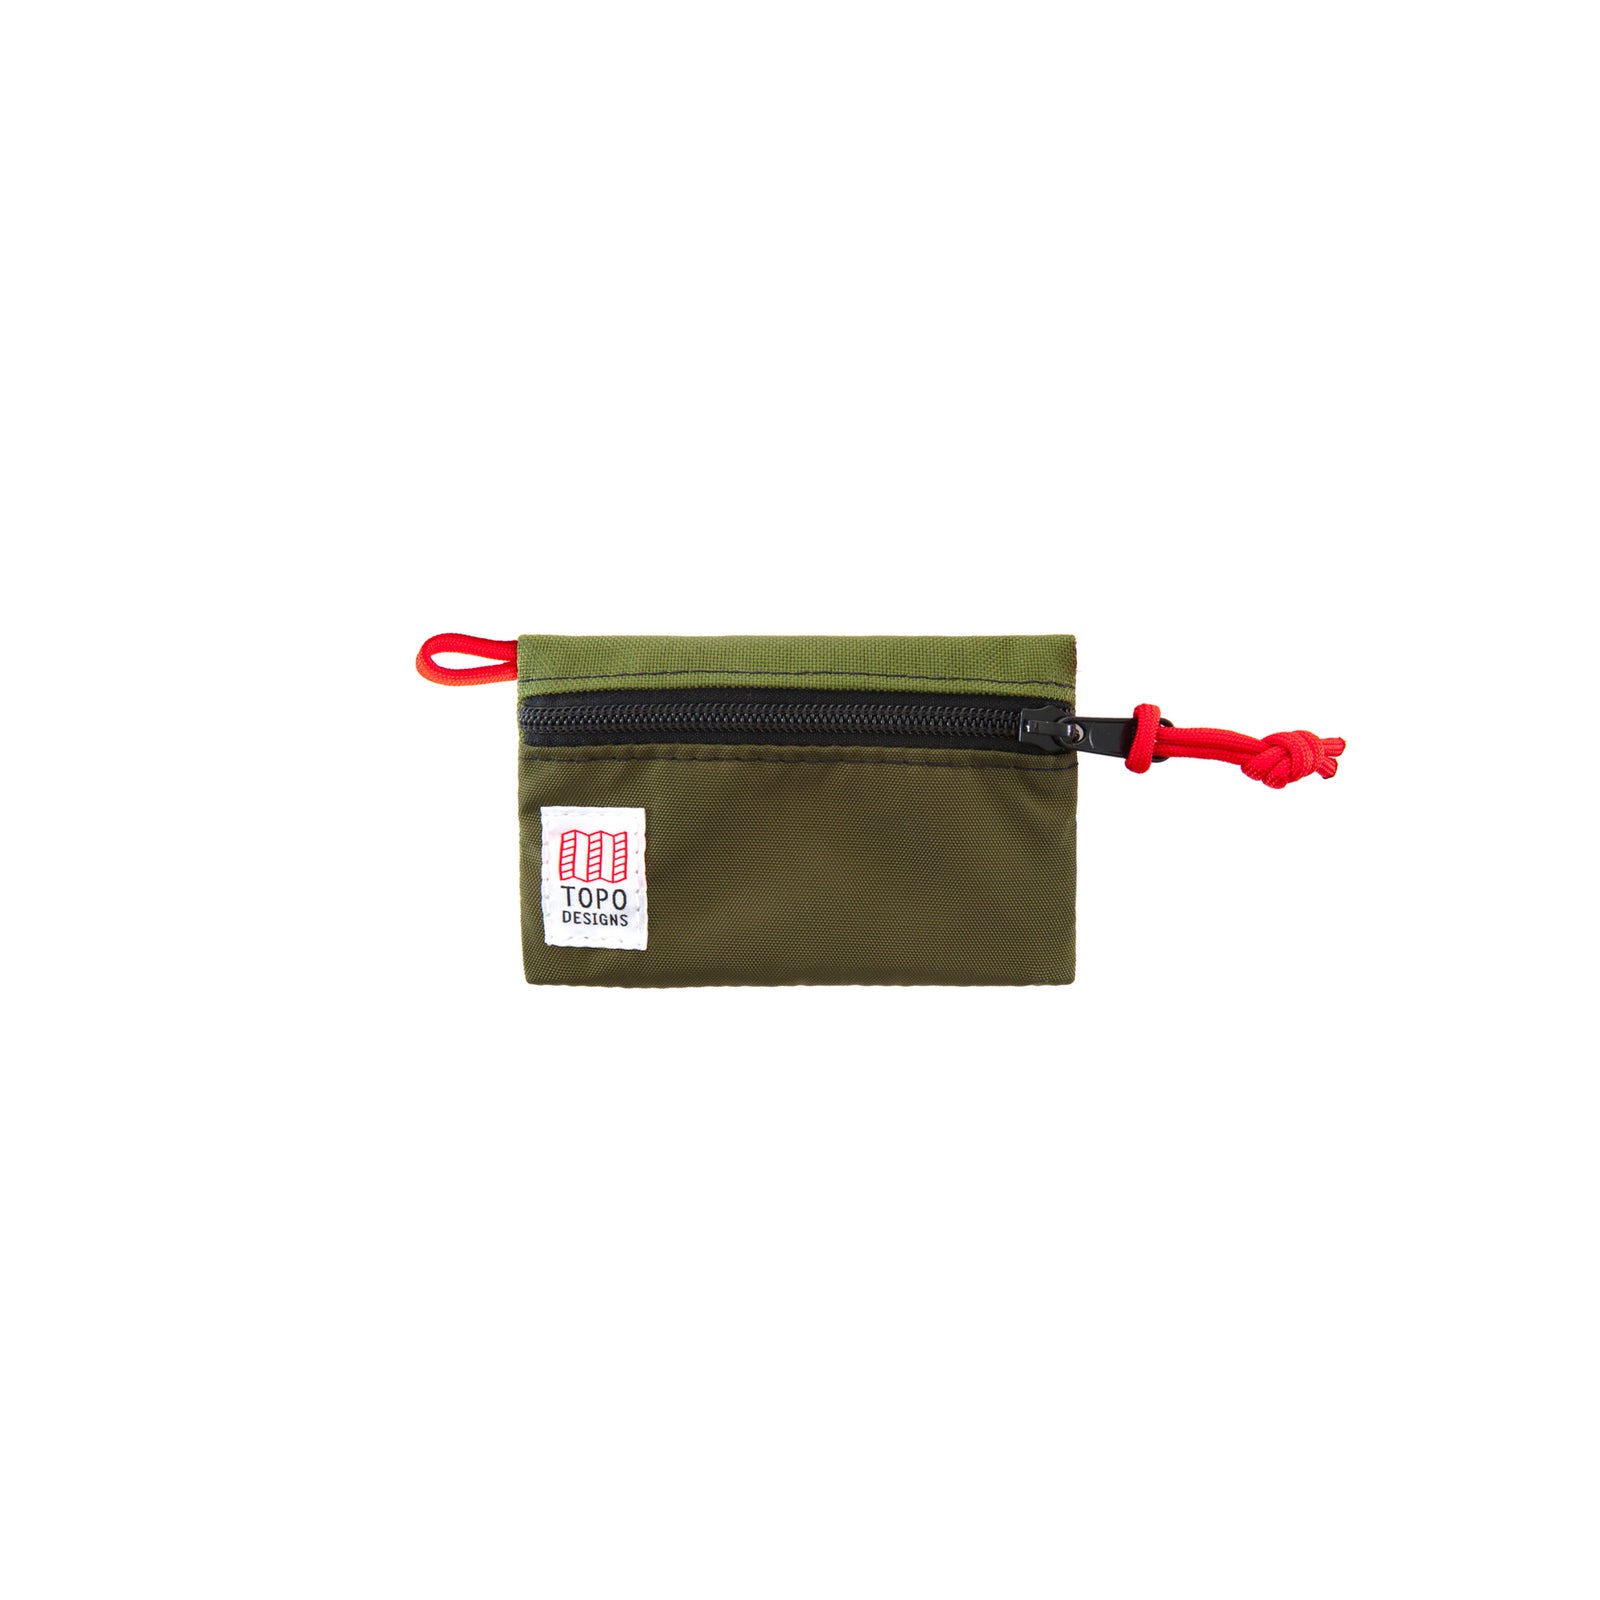 Front product shot of Topo Designs Accessory Bag in "Micro" "Olive - Recycled".